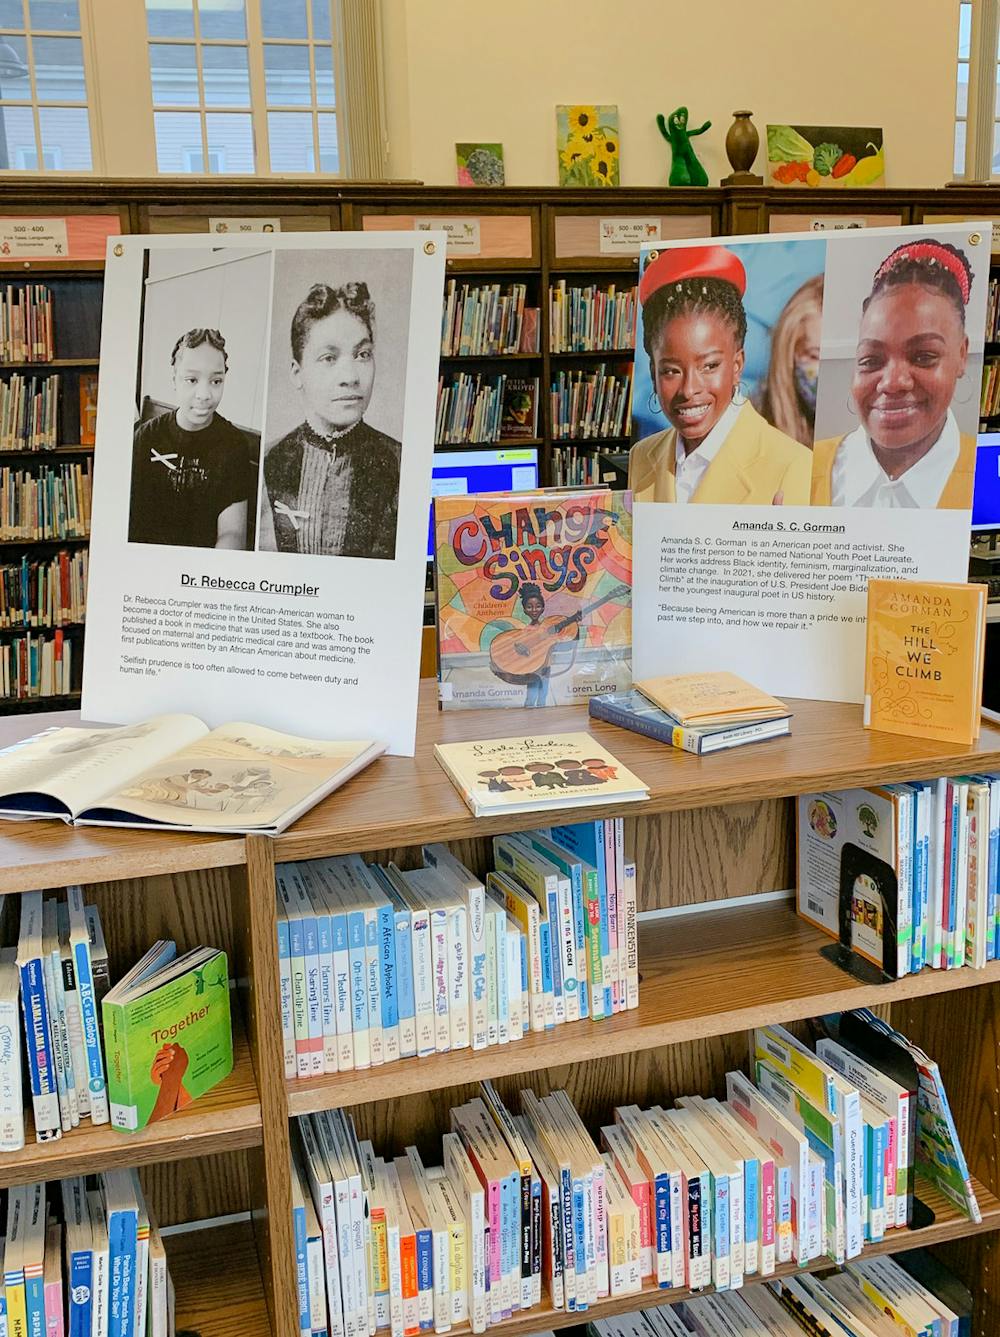 <p>The Washington Park Library hosted a photography exhibit called “The Contributors” Feb. 7-28 which featured work by artist Rachel Briggs that highlights lesser-known Black people who have had profound impacts on society, according to Library Manager Amy Rosa.</p><p>Courtesy of Amy Rosa﻿</p>